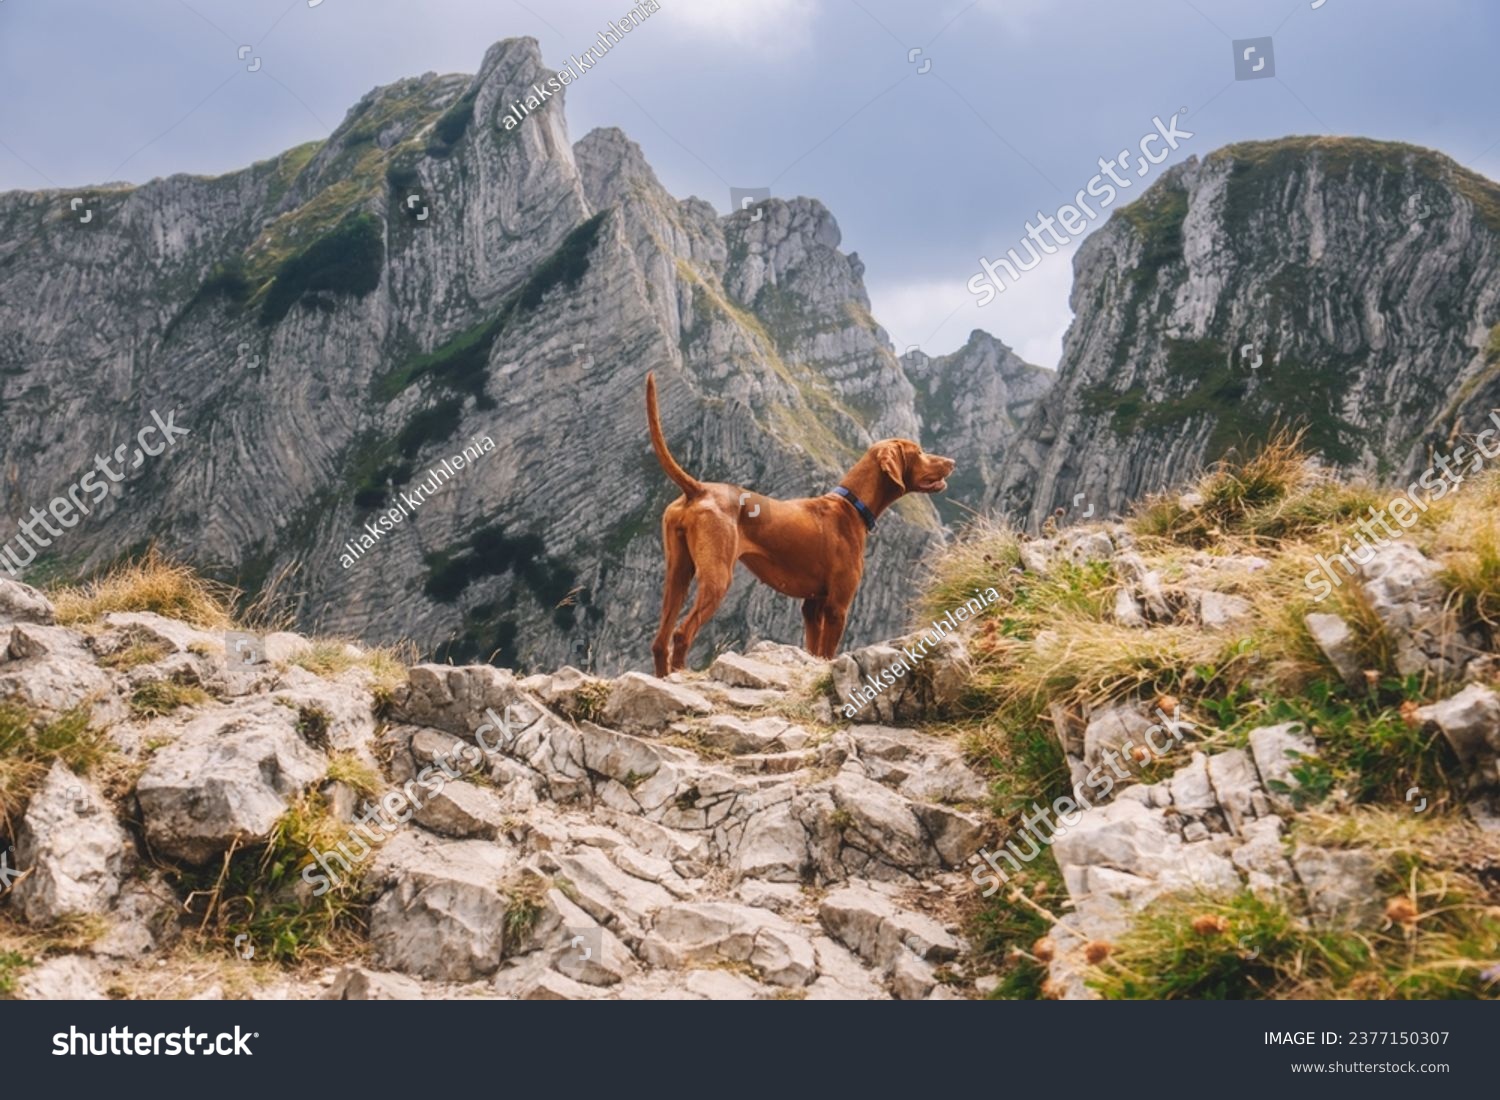 Hungarian Vizsla hunting dog standing in point with tale up among mountains of Durmitor National Park. Pointing hungarian pointer in mountainous landscape. Travel with dog, hiking with pet concept. #2377150307